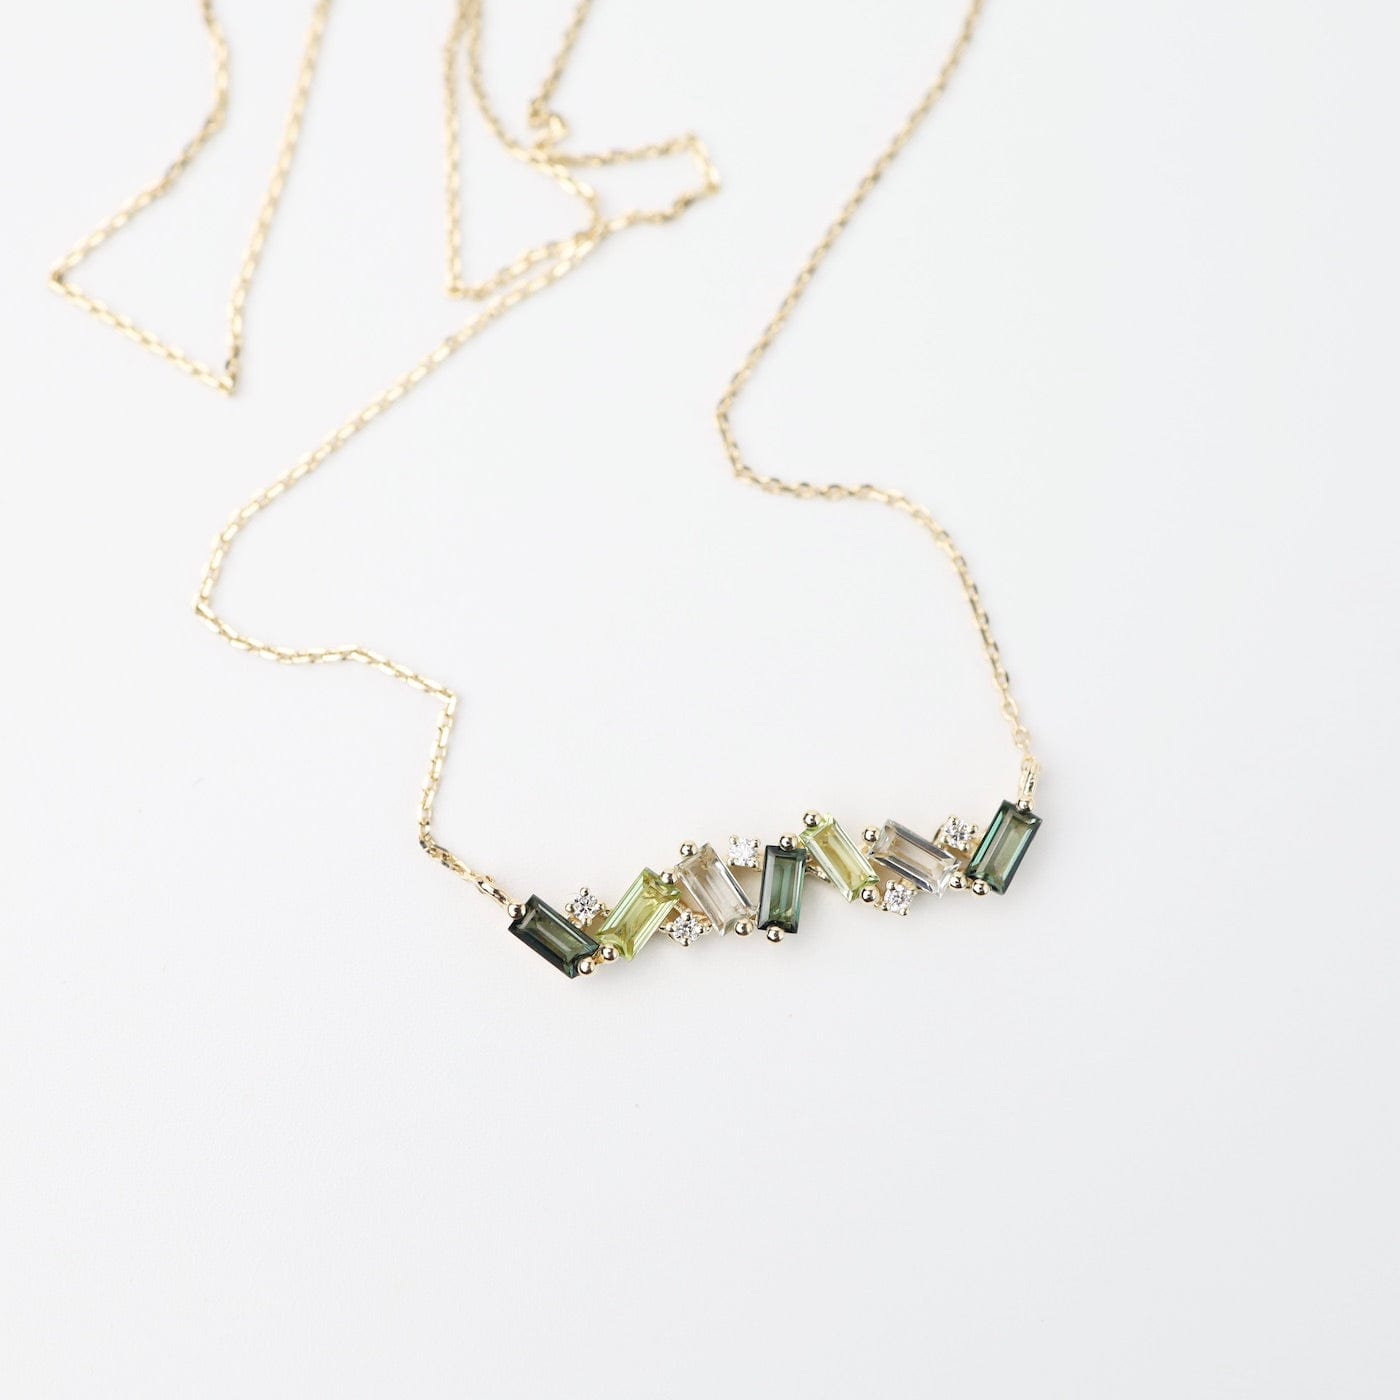 NKL-14K Yellow Gold Frenesia Mixed Green Topaz Bar Necklace